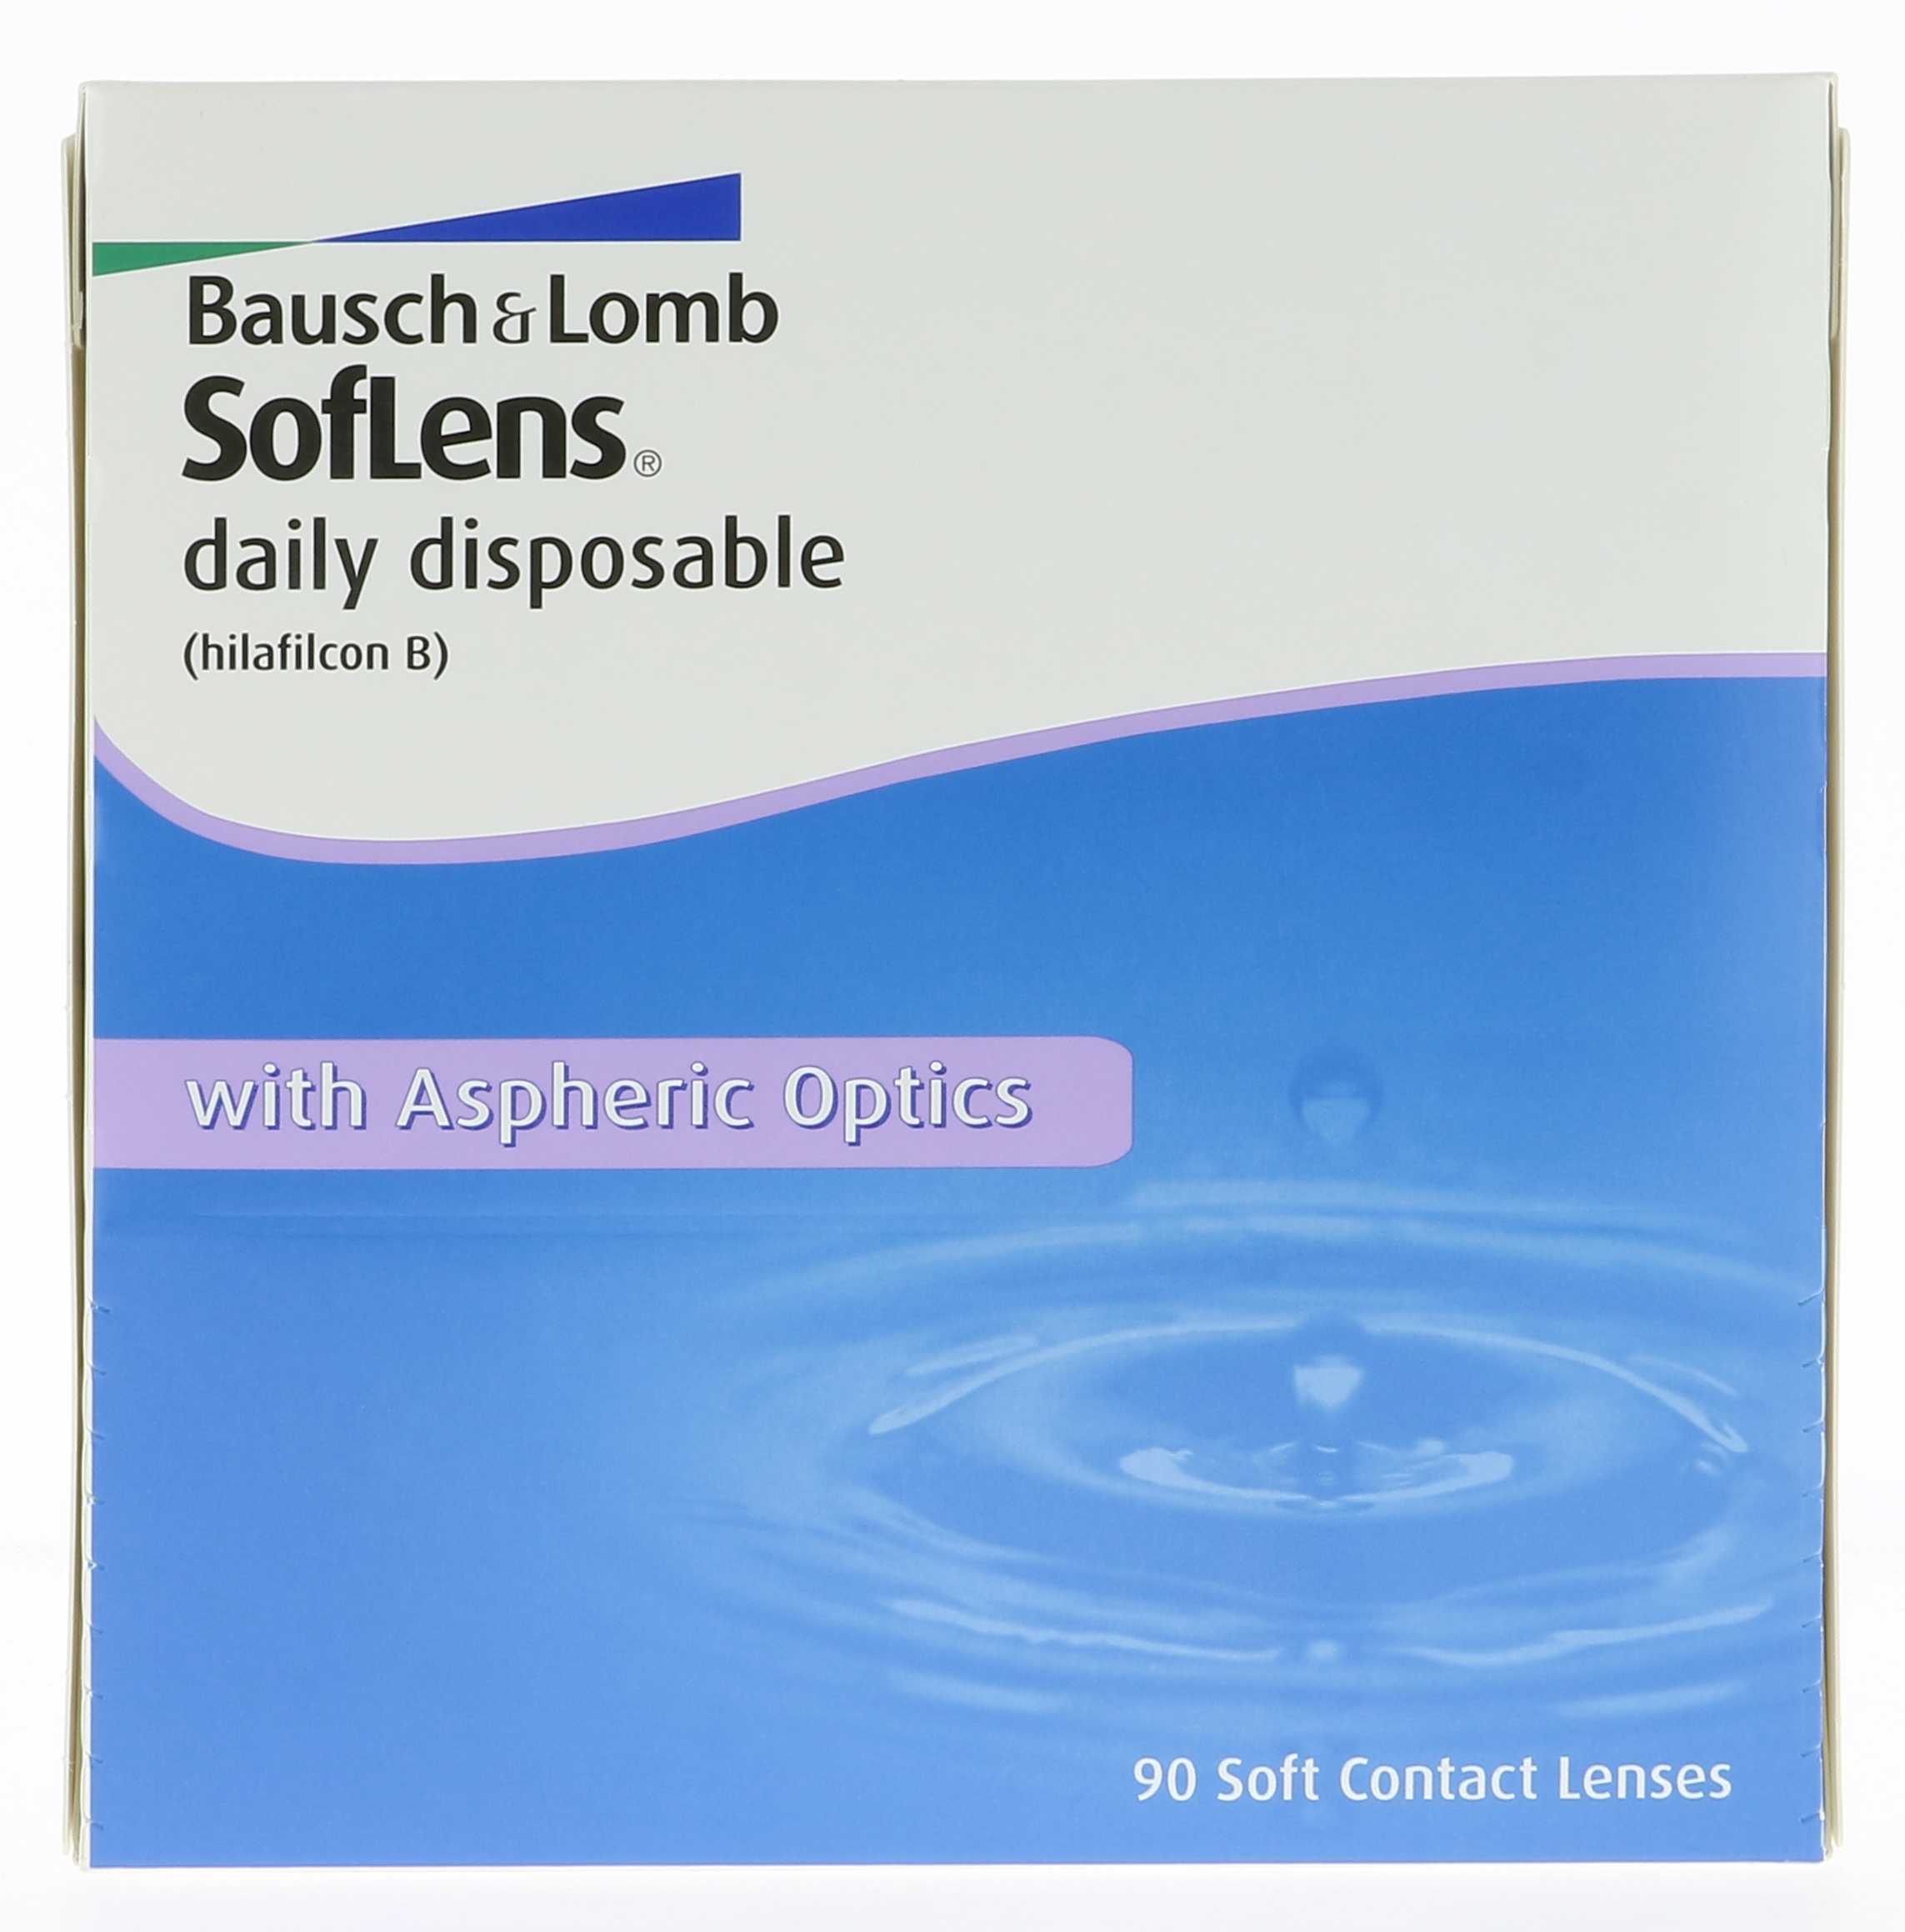  SOFLENS DAILY DISPOSABLE (90) BAUSCH & LOMB